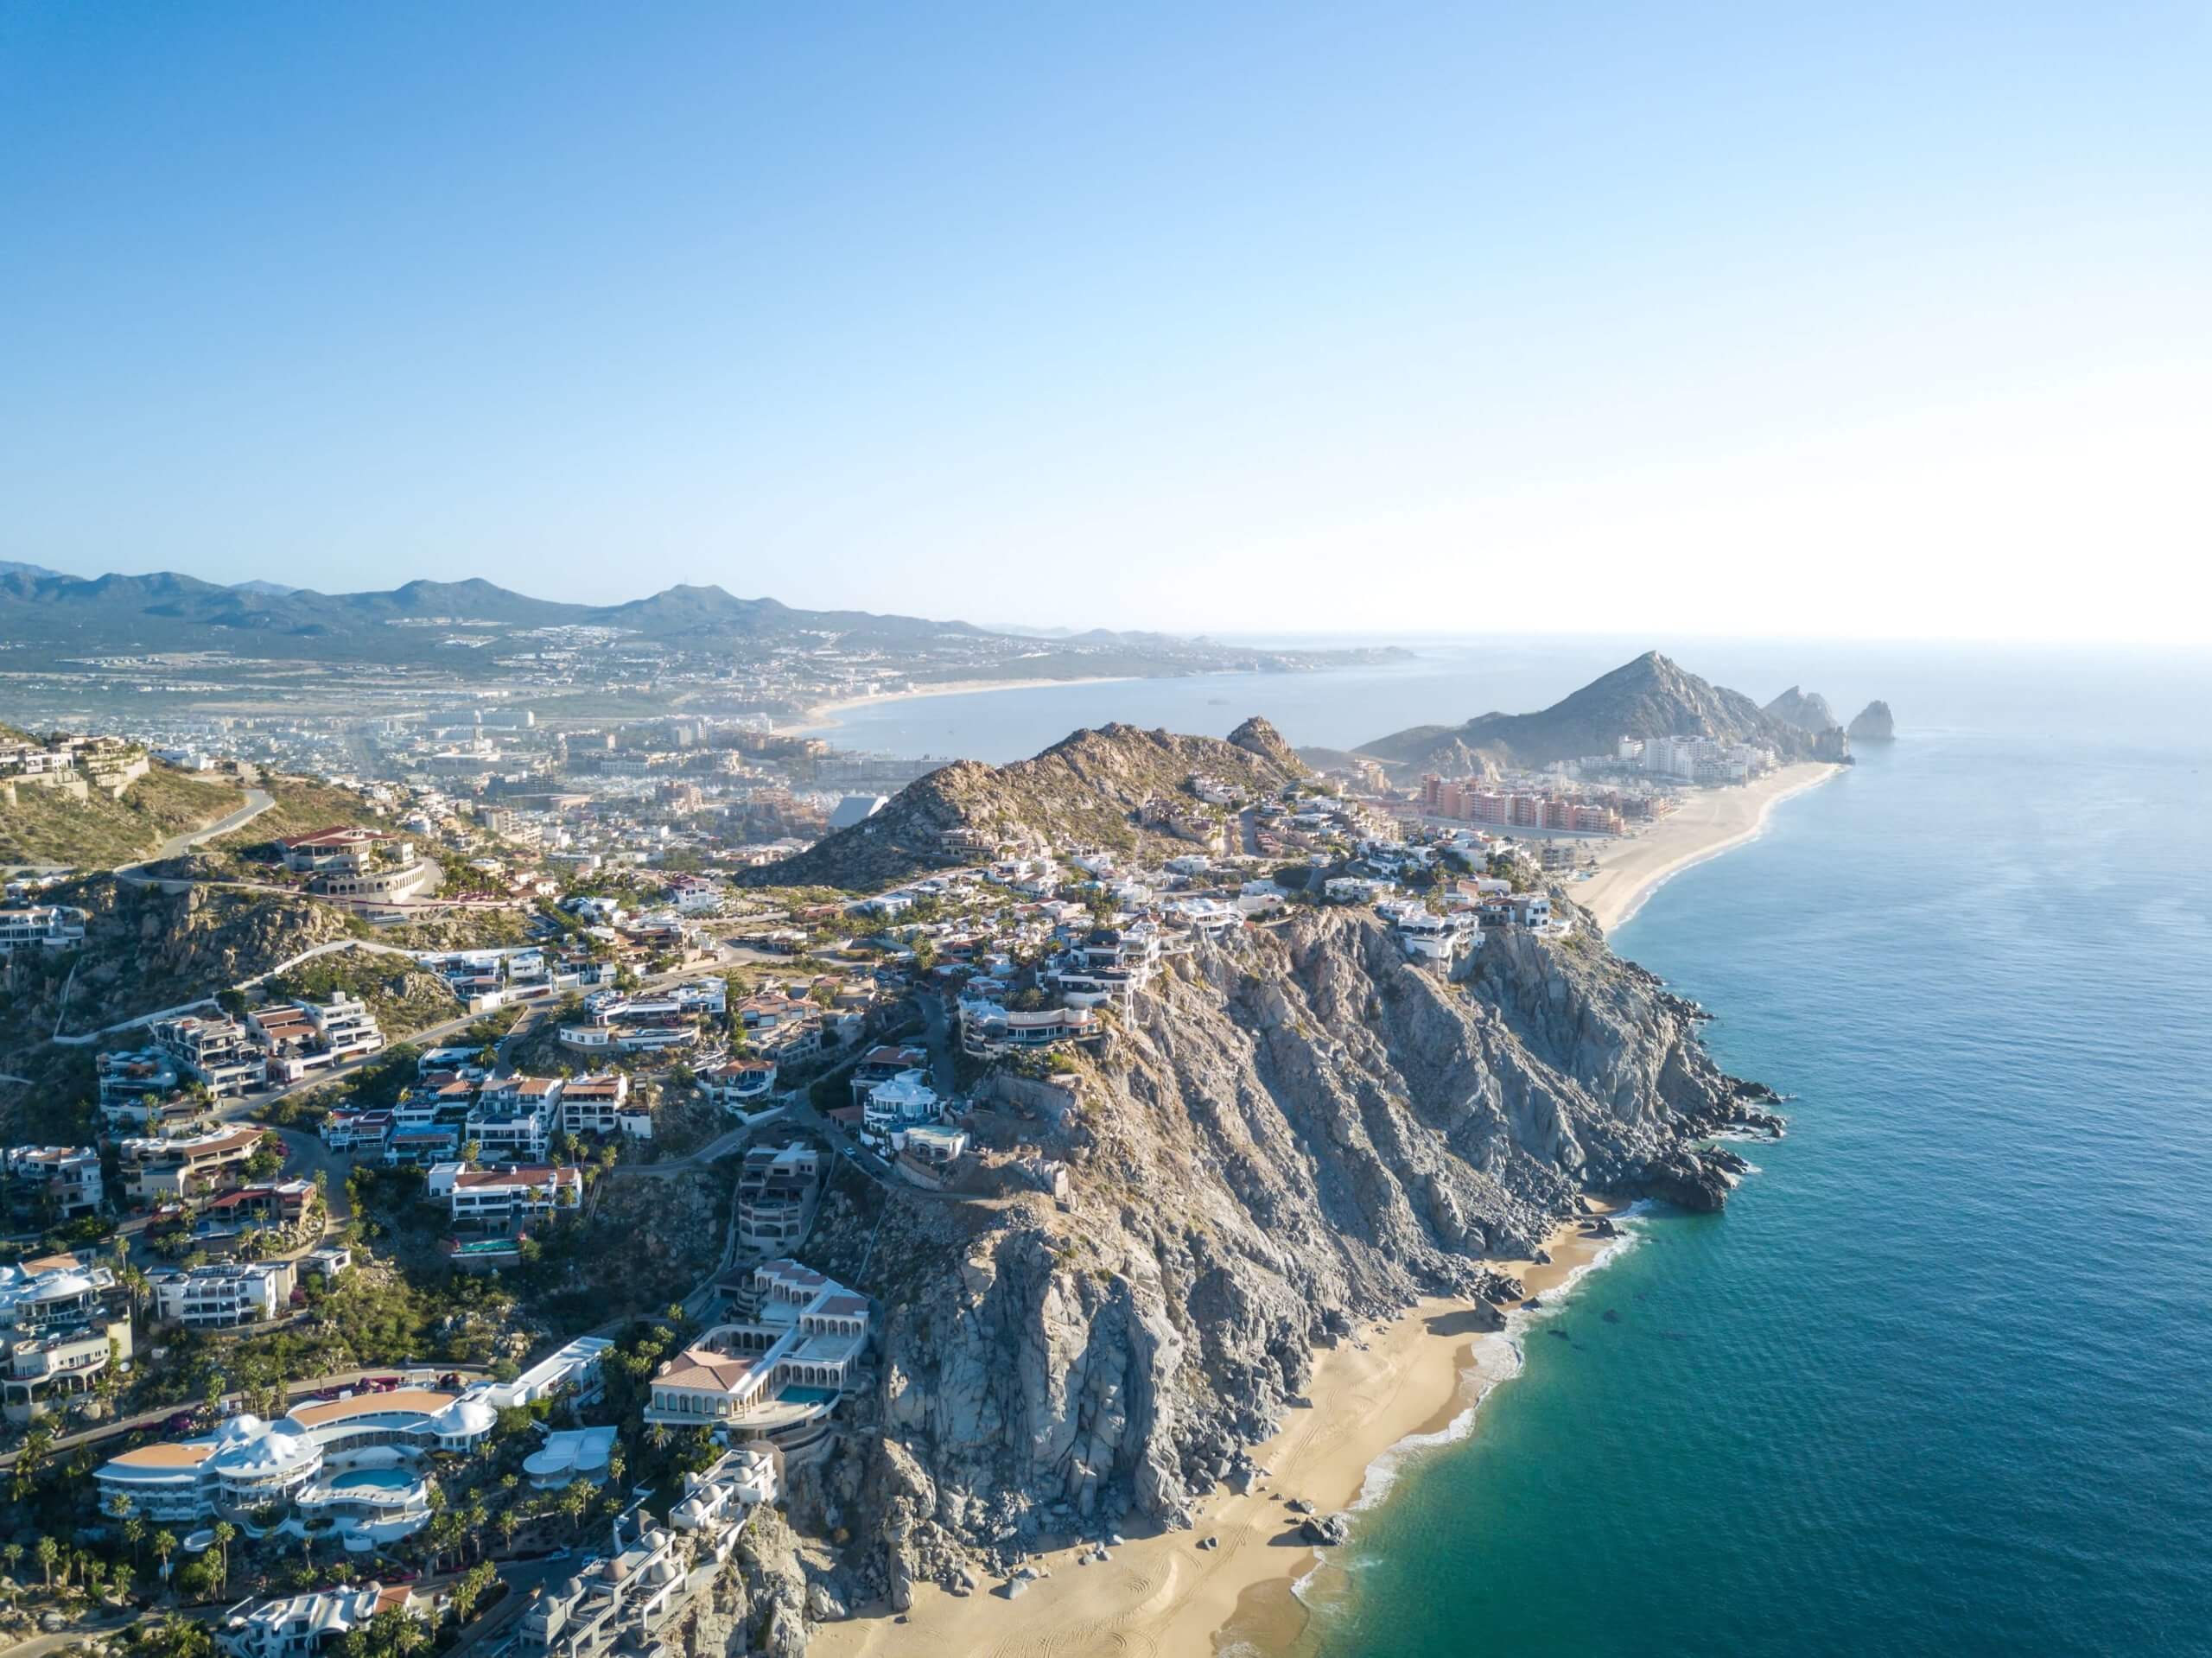 Winnipeg to Cabo, Mexico – $344 CAD roundtrip including taxes w/ United